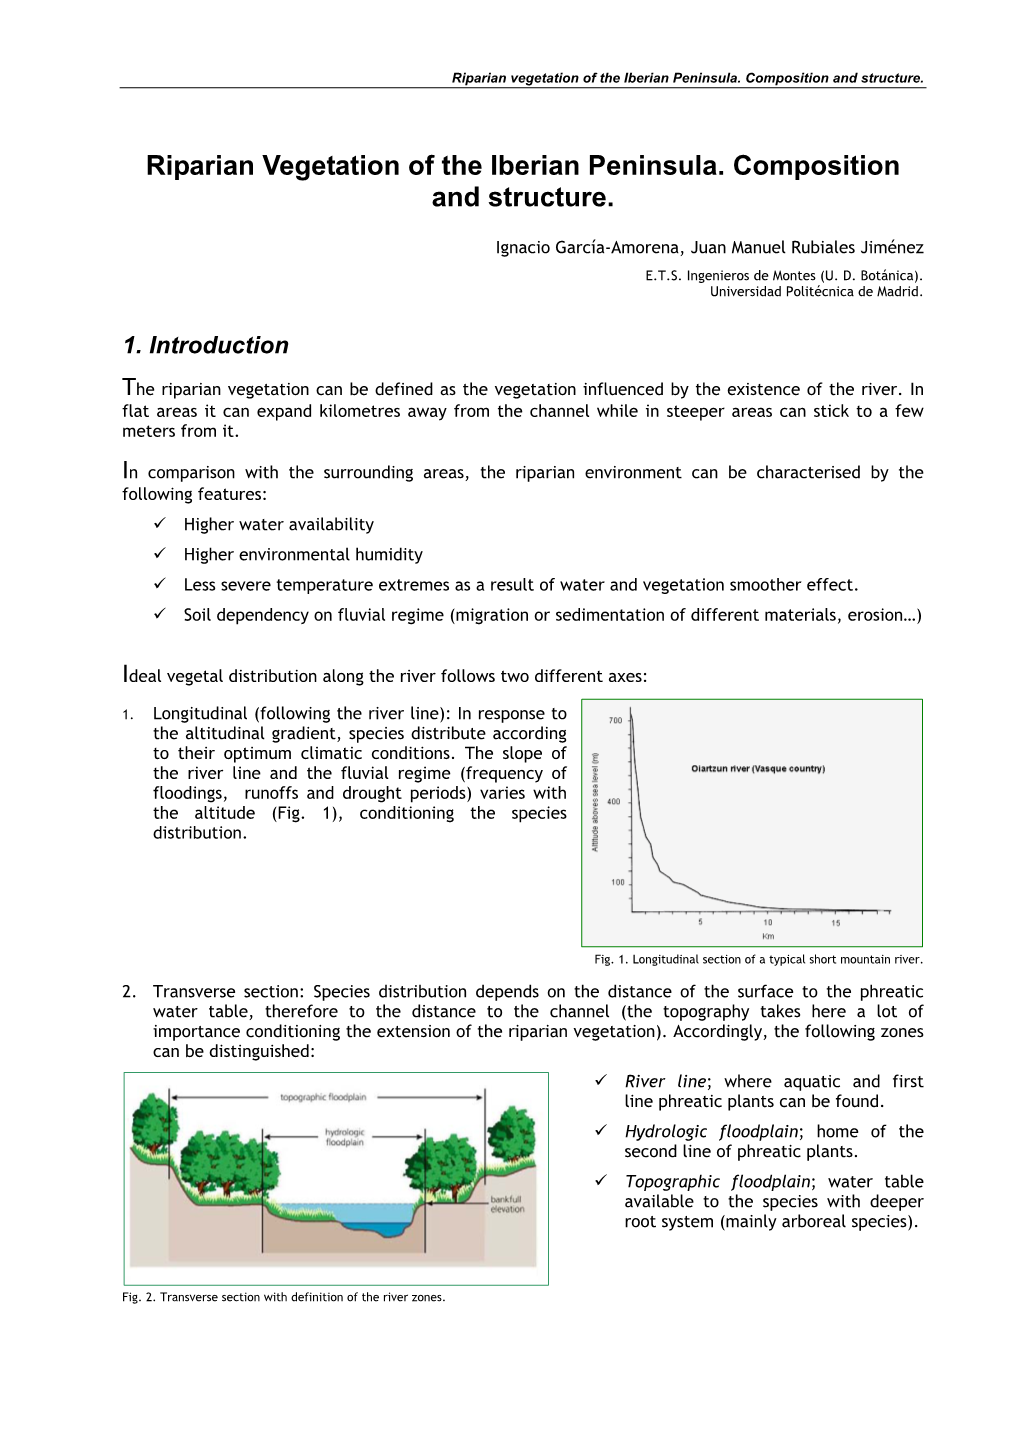 Riparian Vegetation of the Iberian Peninsula. Composition and Structure